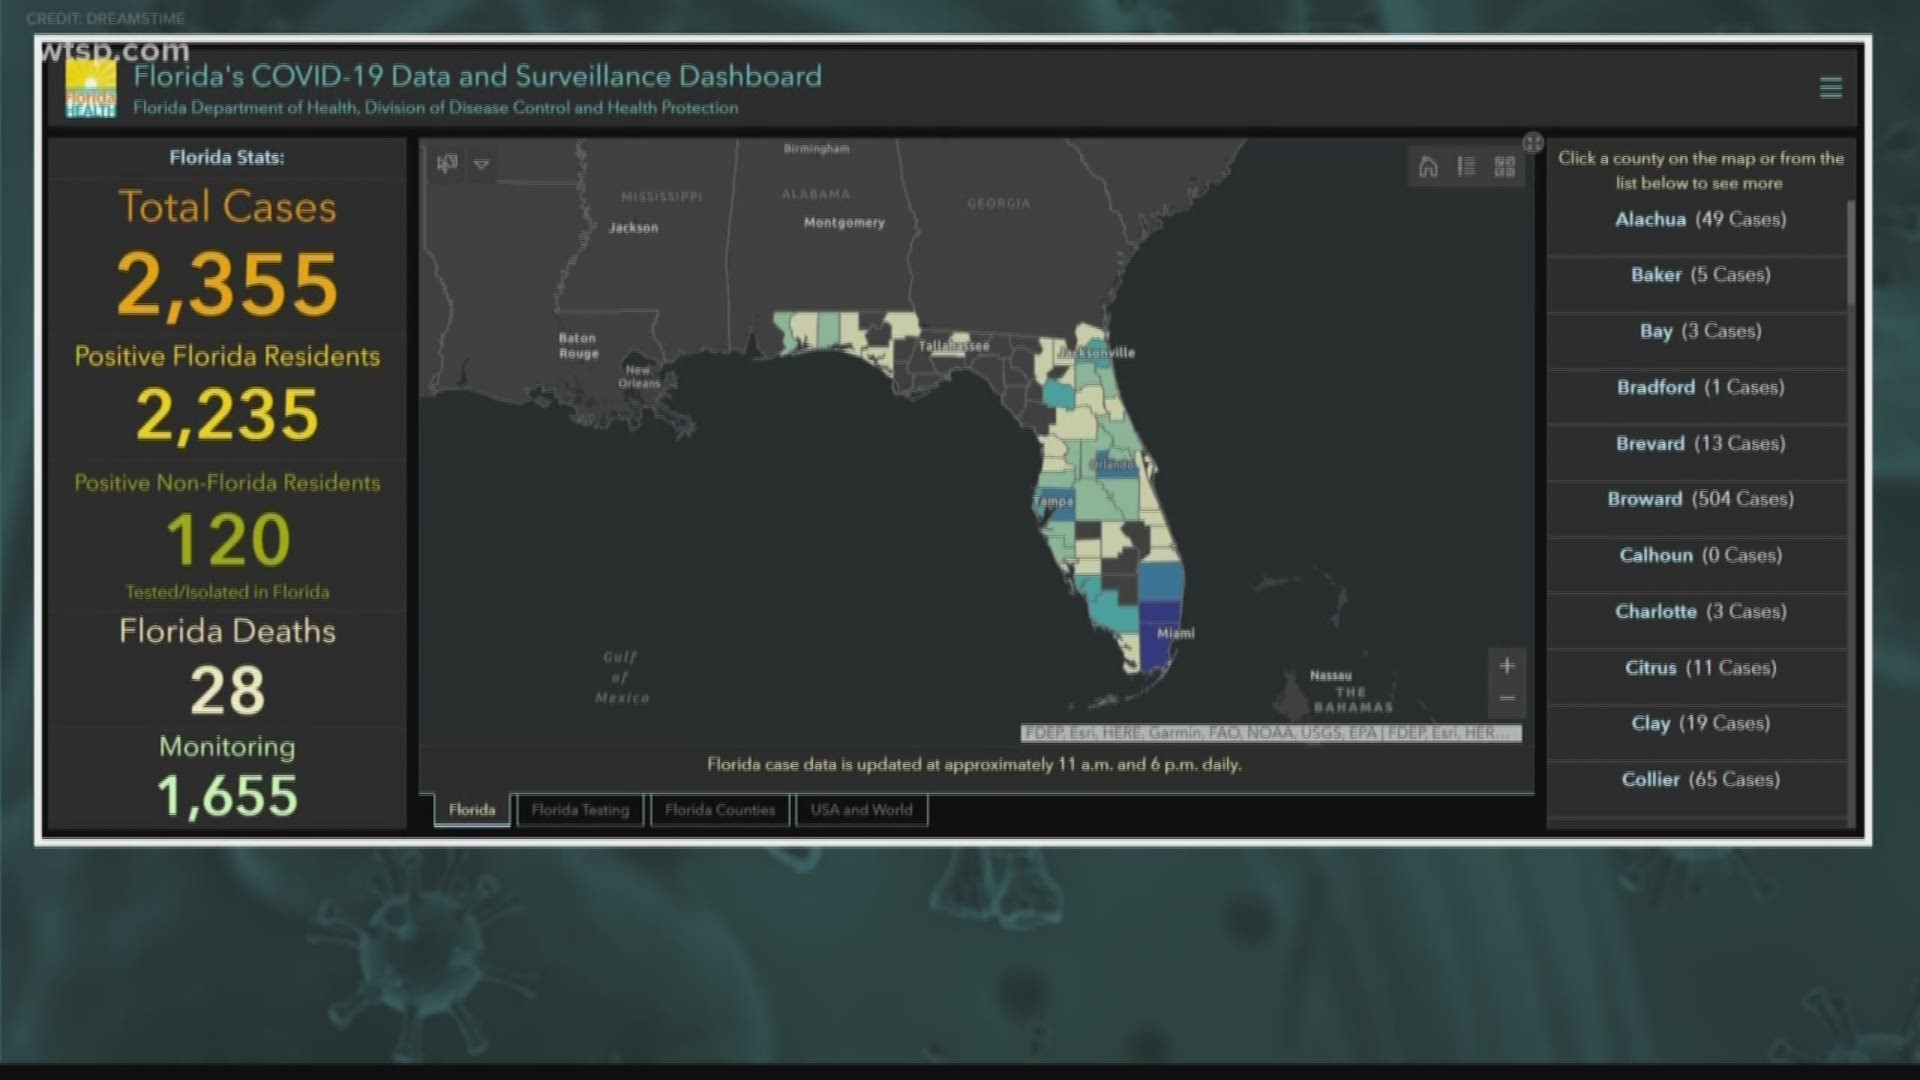 There are now 28 confirmed COVID-19 coronavirus deaths reported from the Florida Department of Health.